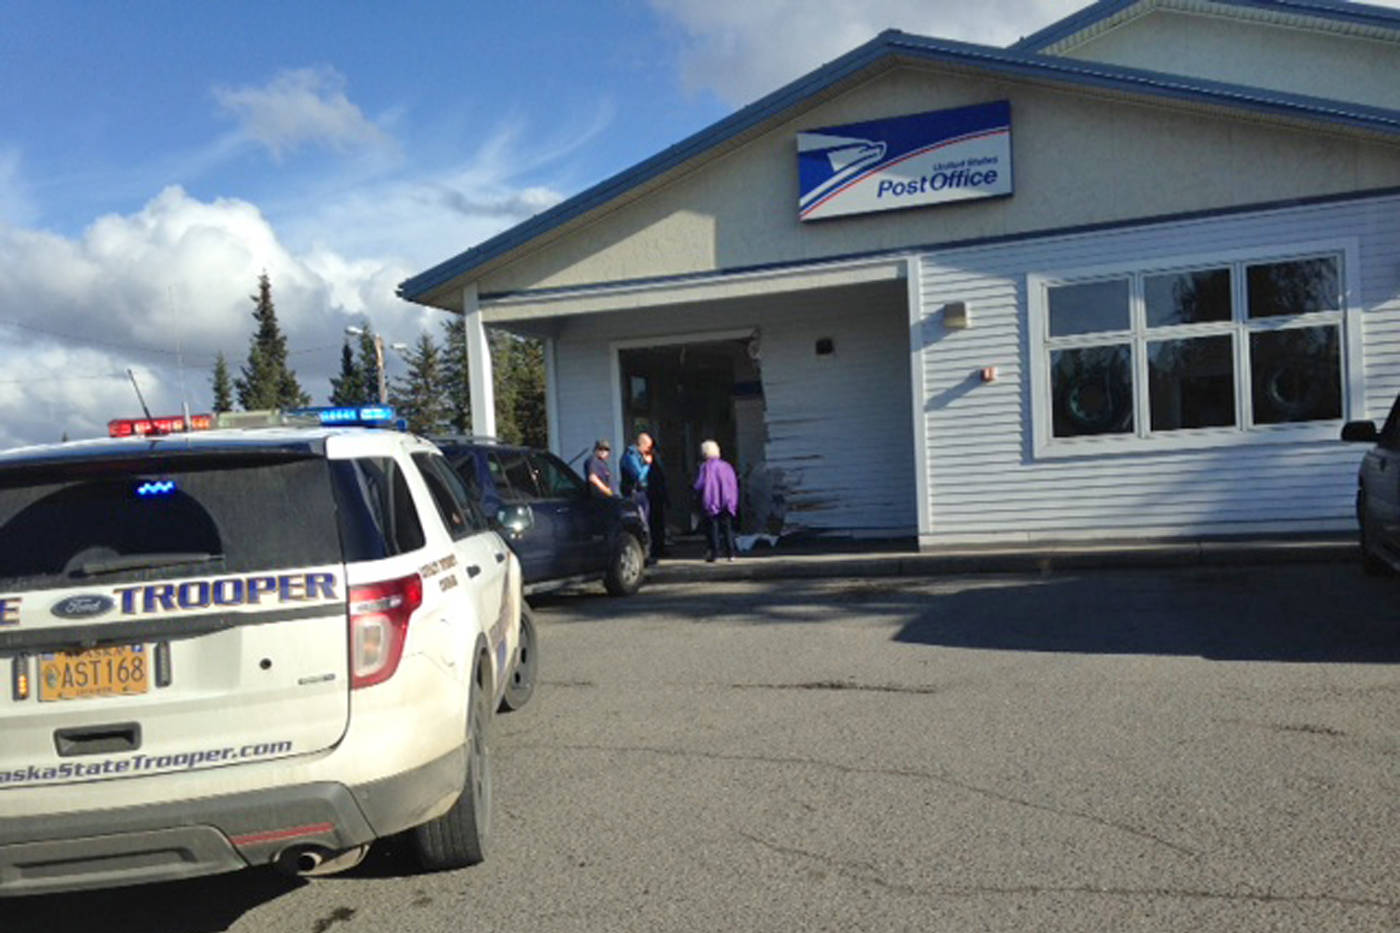 Troopers and others stand near the spot where a black SUV crashed into the front of the Anchor Point Post Office on Friday, Oct. 5, 2018 in Anchor Point, Alaska. In this photo, the vehicle has been moved out of the building, leaving behind a large hole in the front of the post office. (Photo by Yvonne Prucha)